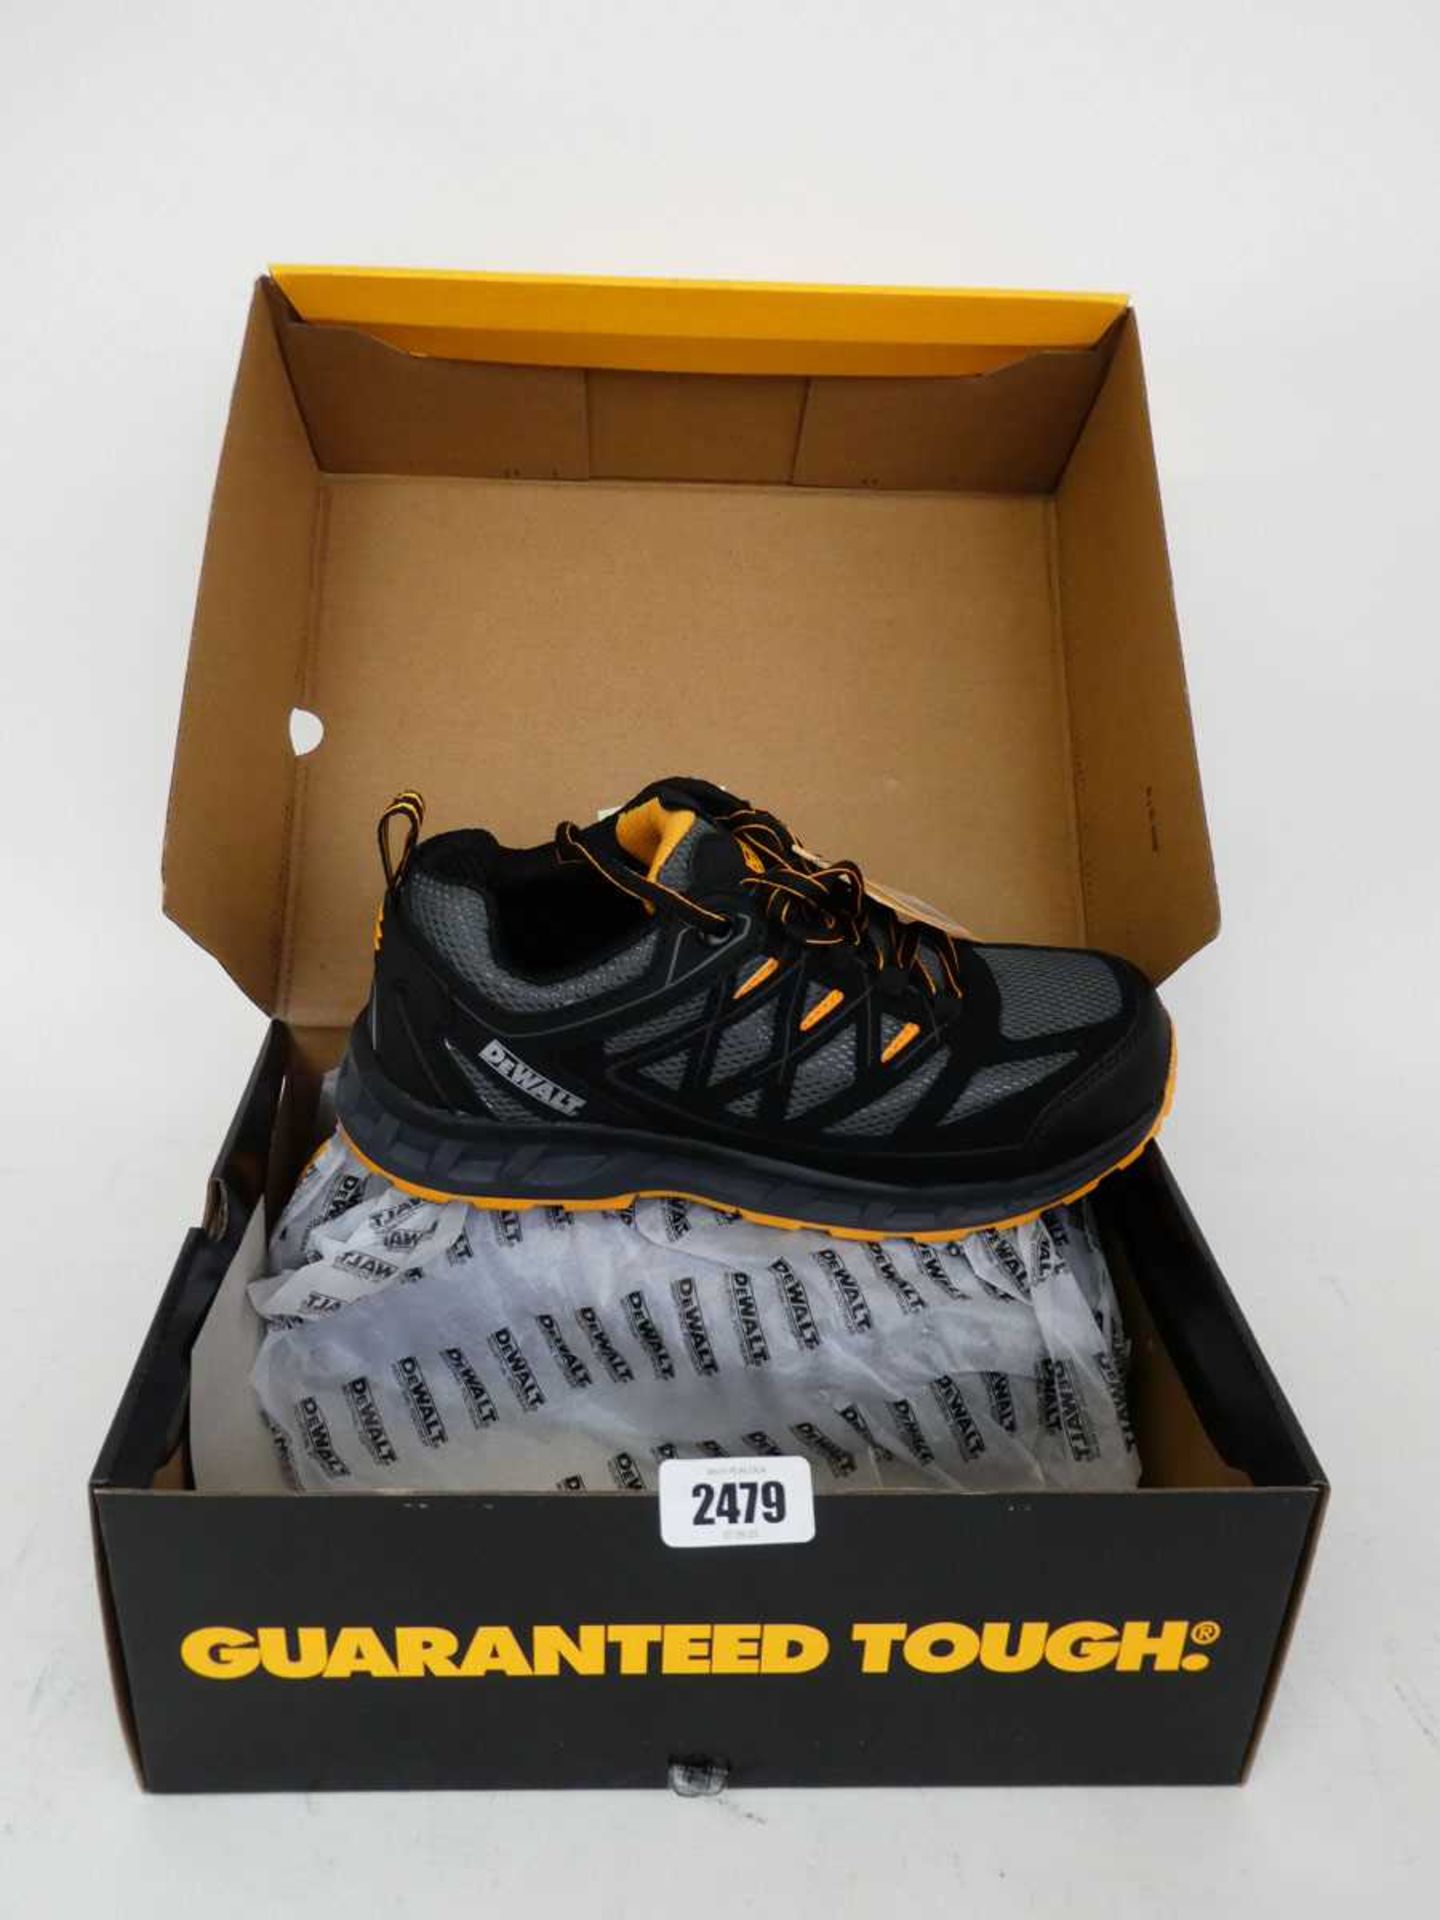 Boxed pair of DeWalt steel toe safety trainers (size 7)